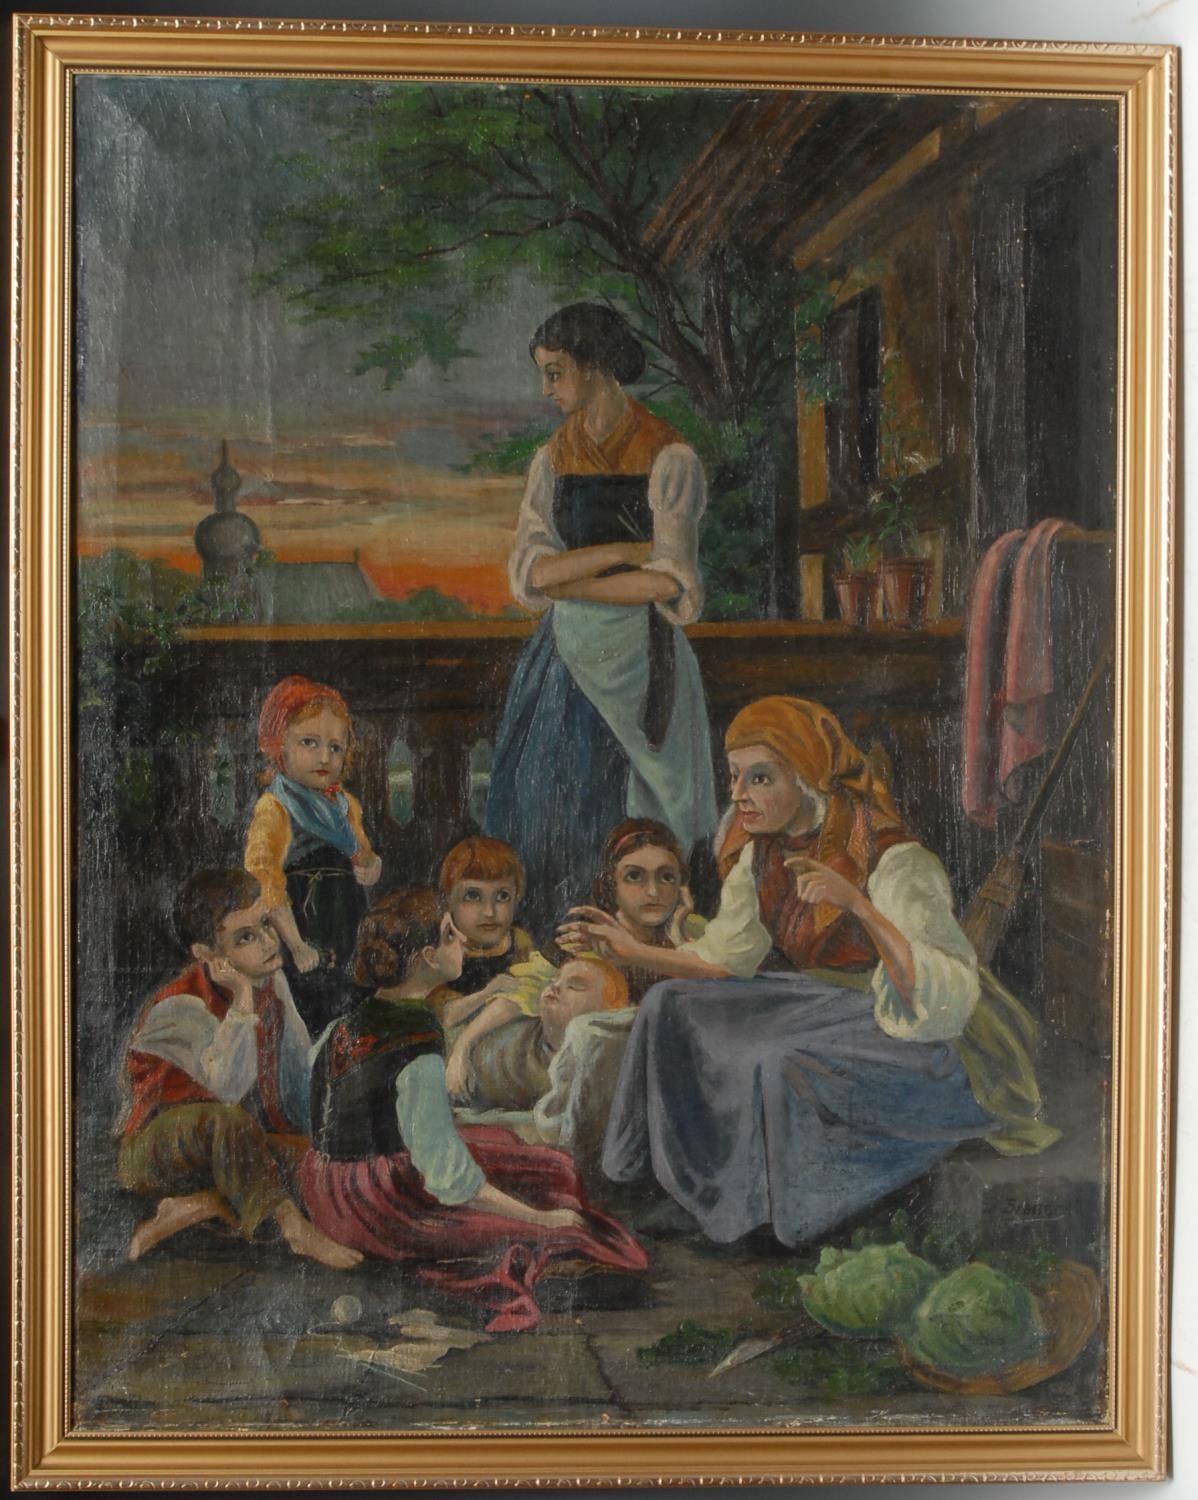 J Brauer (early 20th century) Stories of the Olden Times signed, oil on canvas, 81cm x 64cm - Image 2 of 4